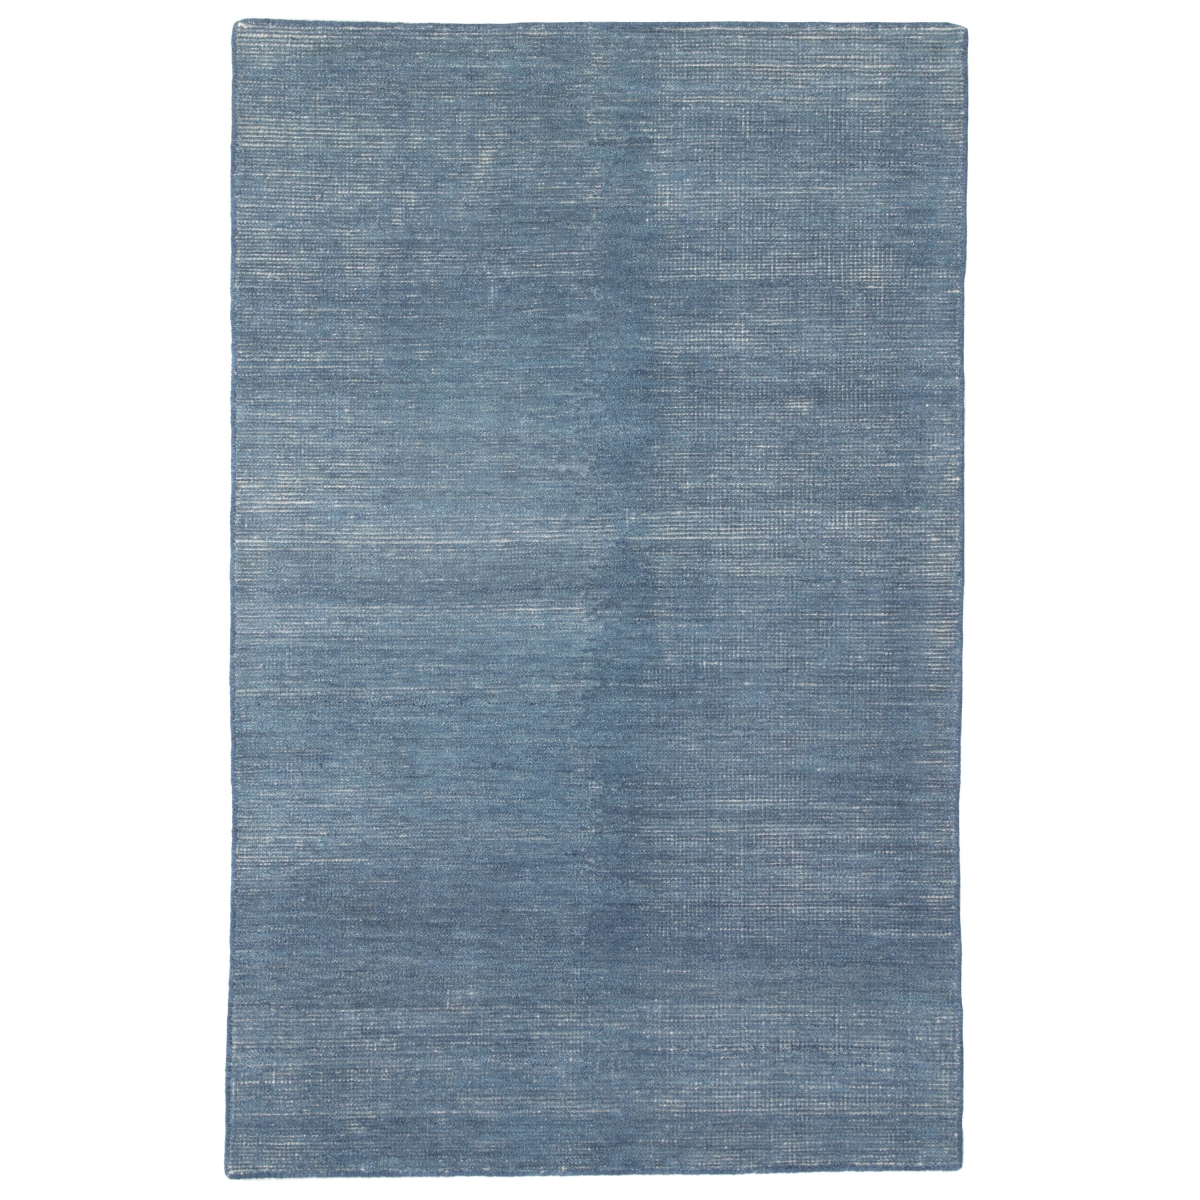 Rug128167 8 X 10 Ft. Paramount Hand-knotted Solid Indigo & White Area Rug